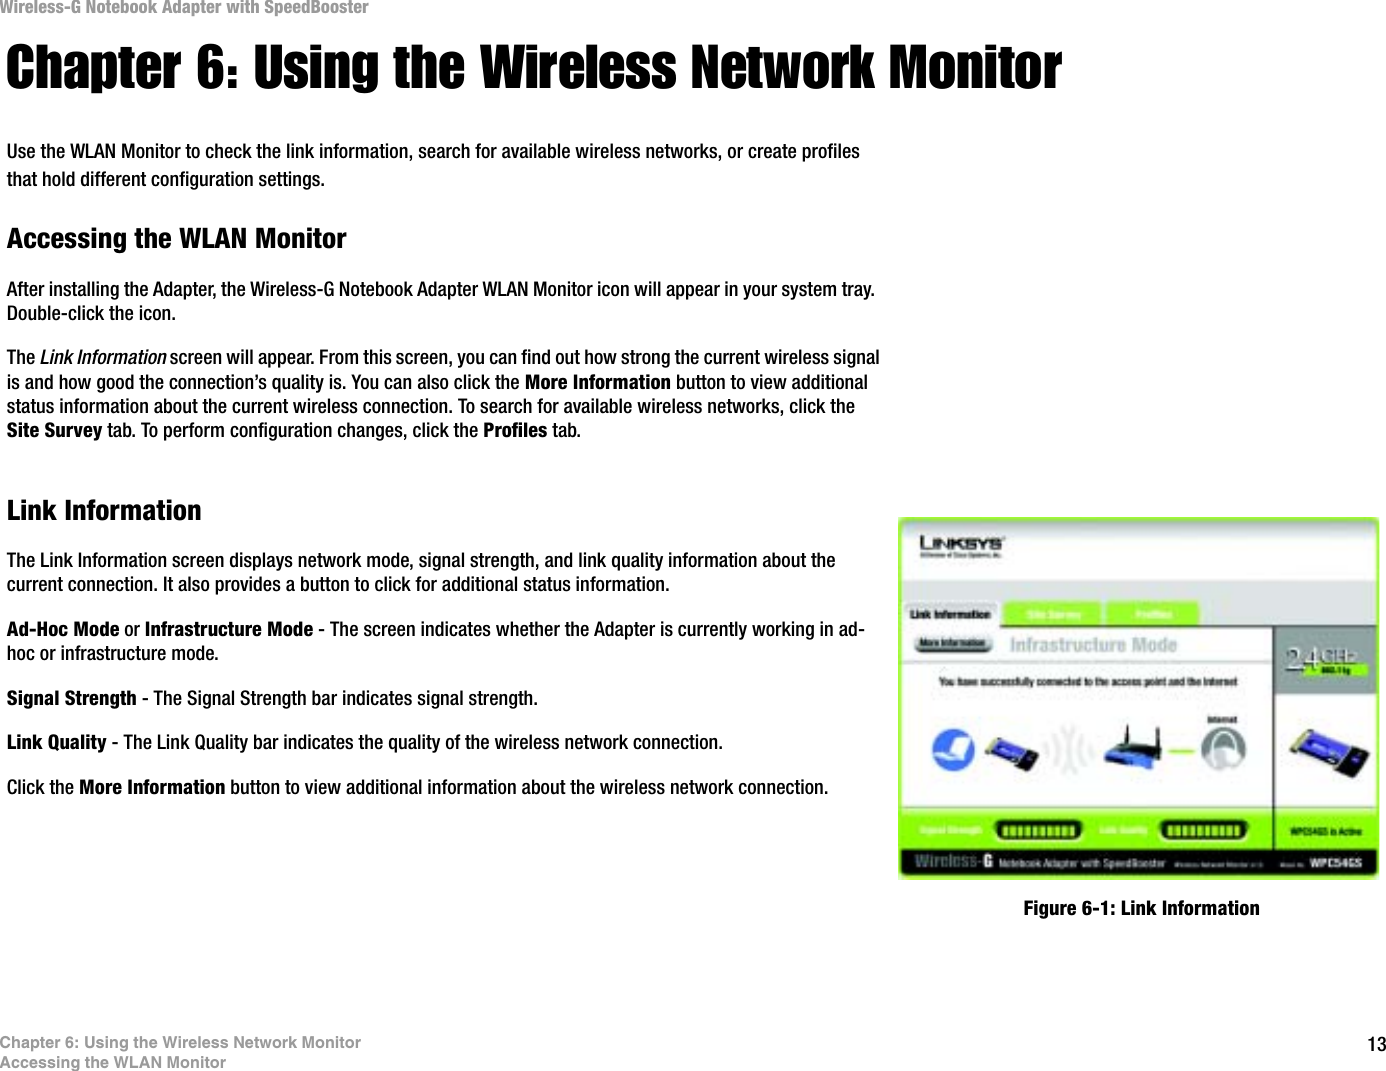 13Chapter 6: Using the Wireless Network MonitorAccessing the WLAN MonitorWireless-G Notebook Adapter with SpeedBoosterChapter 6: Using the Wireless Network MonitorUse the WLAN Monitor to check the link information, search for available wireless networks, or create profiles that hold different configuration settings.Accessing the WLAN MonitorAfter installing the Adapter, the Wireless-G Notebook Adapter WLAN Monitor icon will appear in your system tray.  Double-click the icon.The Link Information screen will appear. From this screen, you can find out how strong the current wireless signal is and how good the connection’s quality is. You can also click the More Information button to view additional status information about the current wireless connection. To search for available wireless networks, click the Site Survey tab. To perform configuration changes, click the Profiles tab.Link InformationThe Link Information screen displays network mode, signal strength, and link quality information about the current connection. It also provides a button to click for additional status information.  Ad-Hoc Mode or Infrastructure Mode - The screen indicates whether the Adapter is currently working in ad-hoc or infrastructure mode.Signal Strength - The Signal Strength bar indicates signal strength. Link Quality - The Link Quality bar indicates the quality of the wireless network connection.Click the More Information button to view additional information about the wireless network connection. Figure 6-1: Link Information